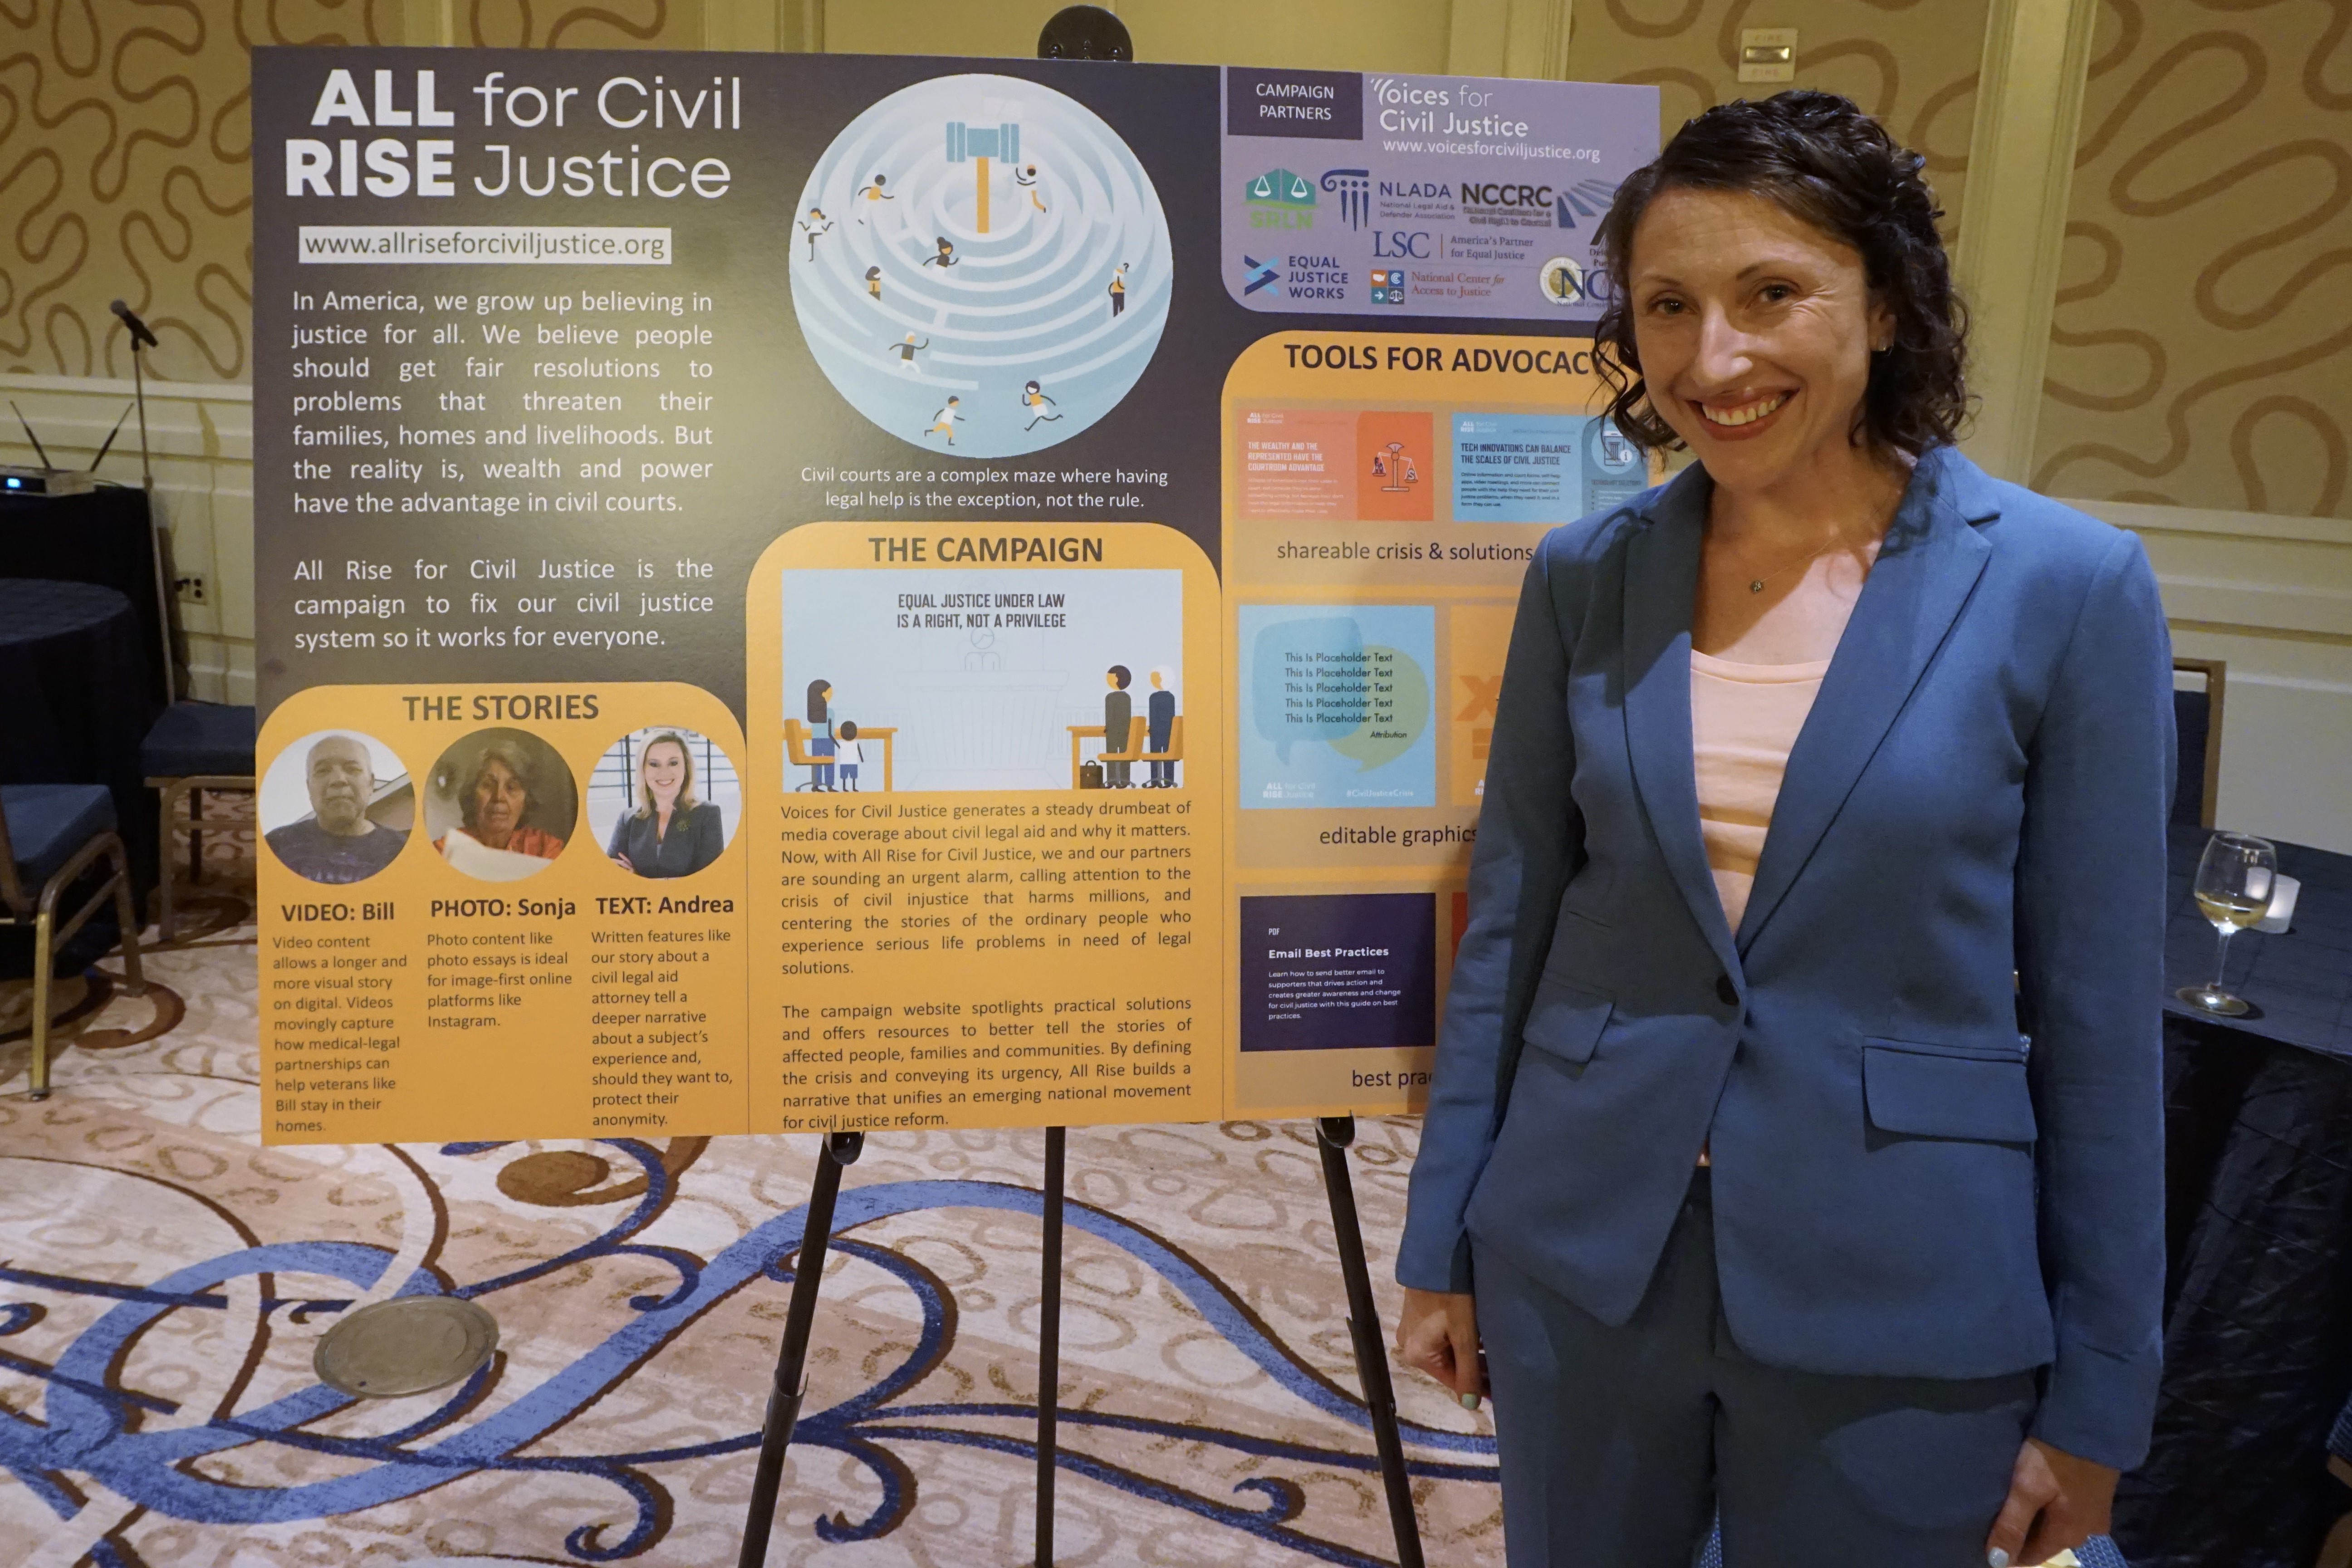 Esme Caramello (Harvard Law) displays her poster on "Effective Storytelling and Media Advocacy for Civil Justice System Reform."